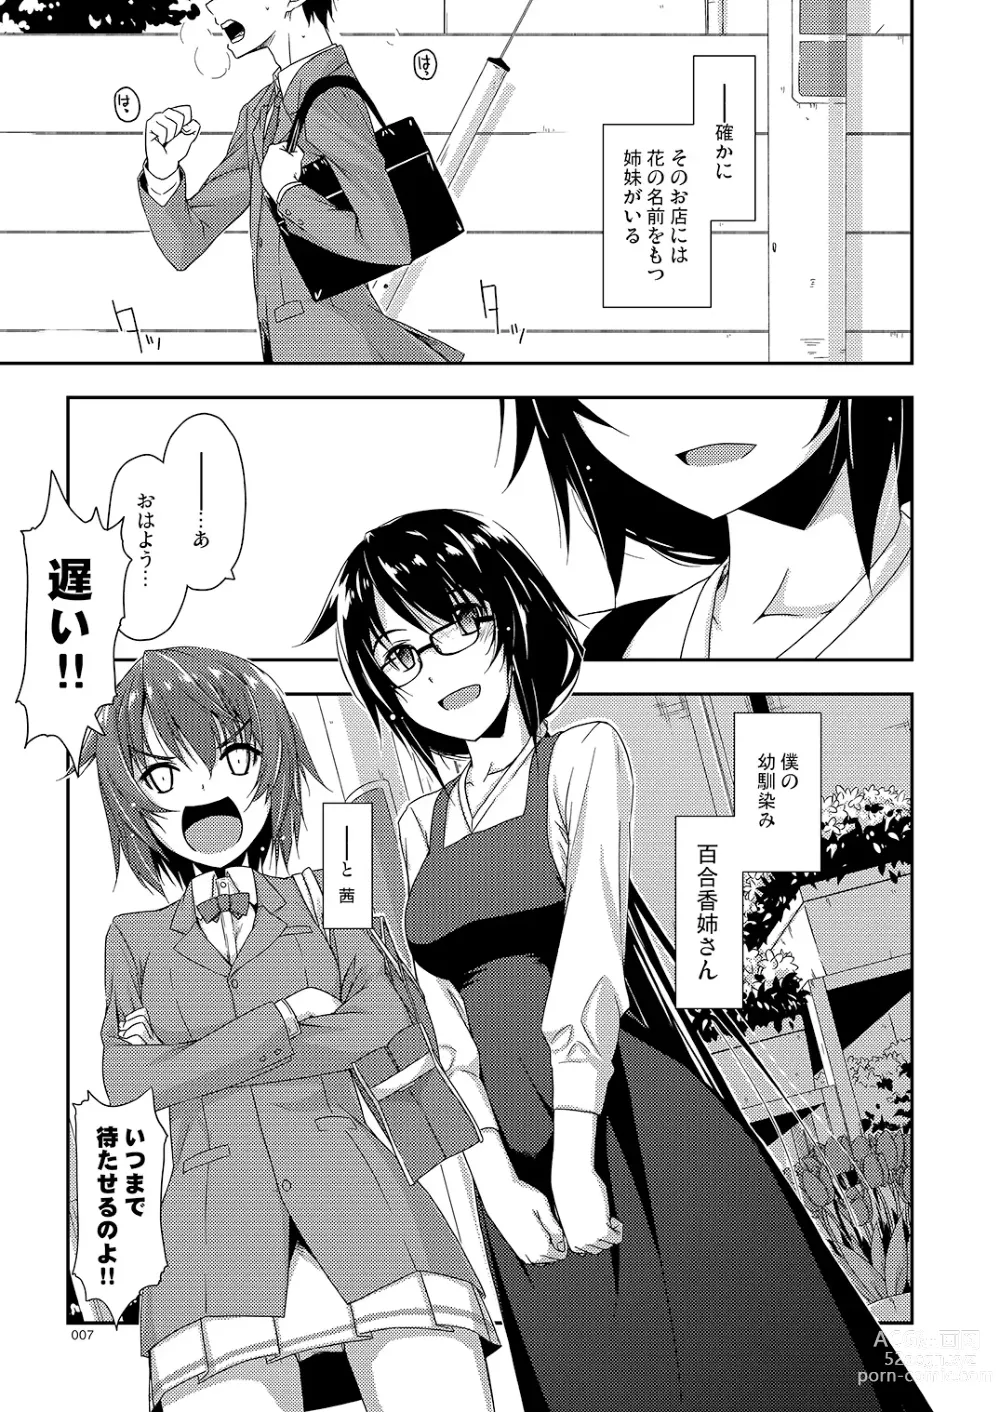 Page 7 of doujinshi Rouka Soushuuhen - Tinkered Flower Perfect Collection